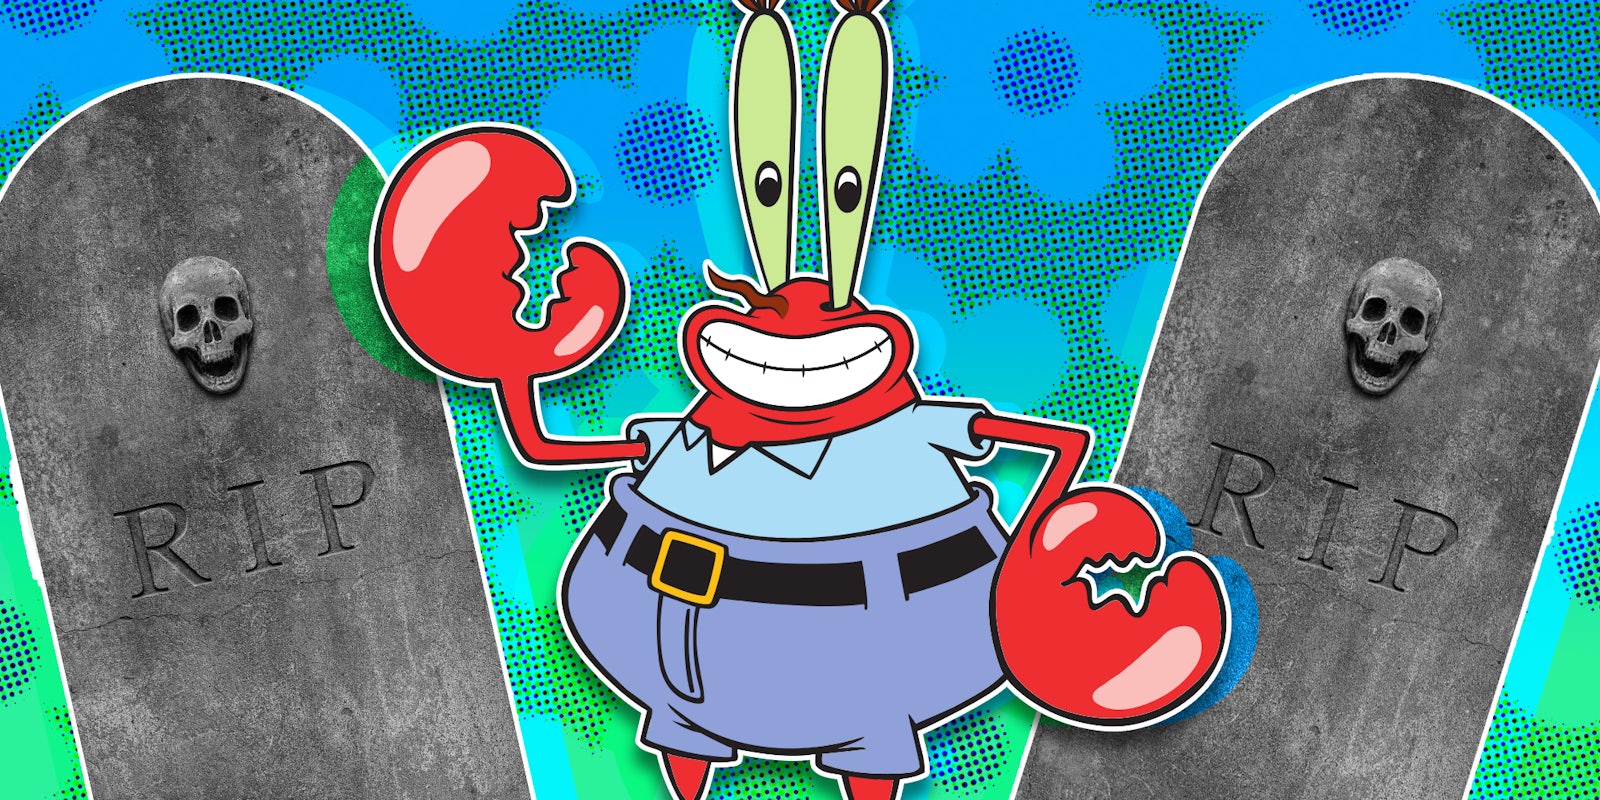 Mr. Krabs in front of two tombstones and floral backdrop